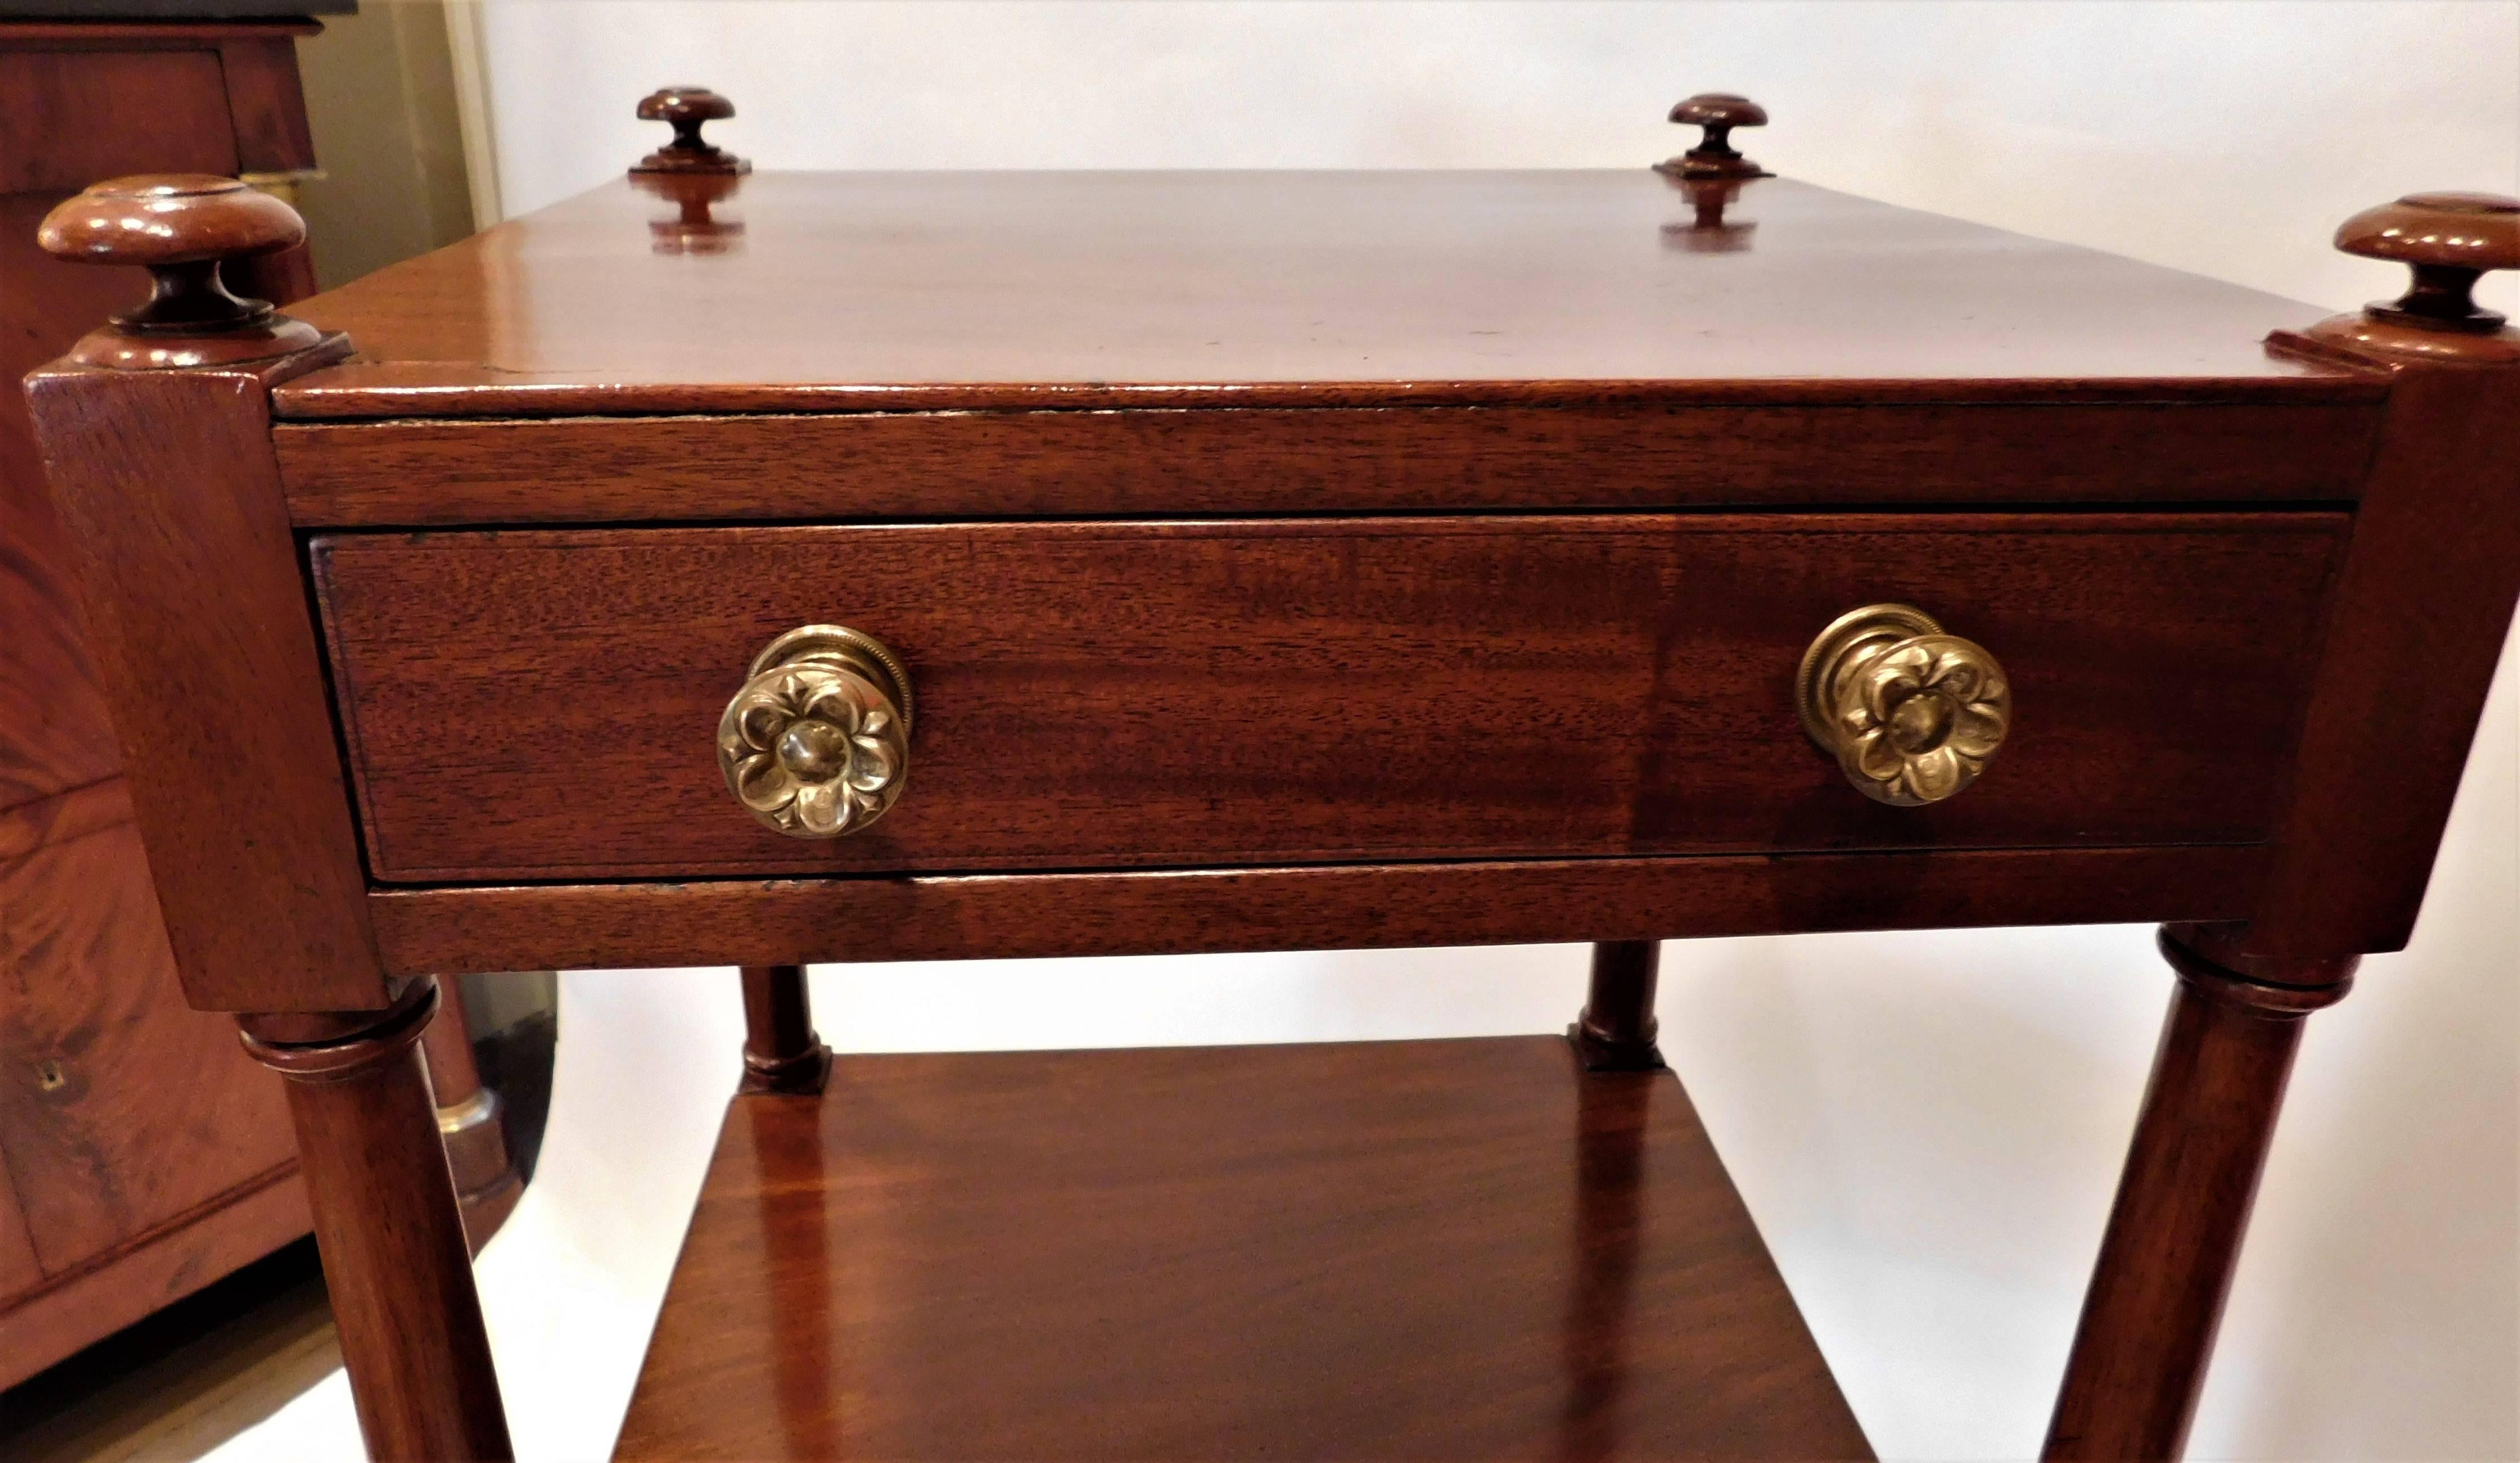 Beautiful old French polish, rich patina. The three drawers make this étagère unusual. Turned finials, hand-turned Tuscan columns. Mahogany with English oak secondary wood, original brass cup castors, replaced ormolu pulls.